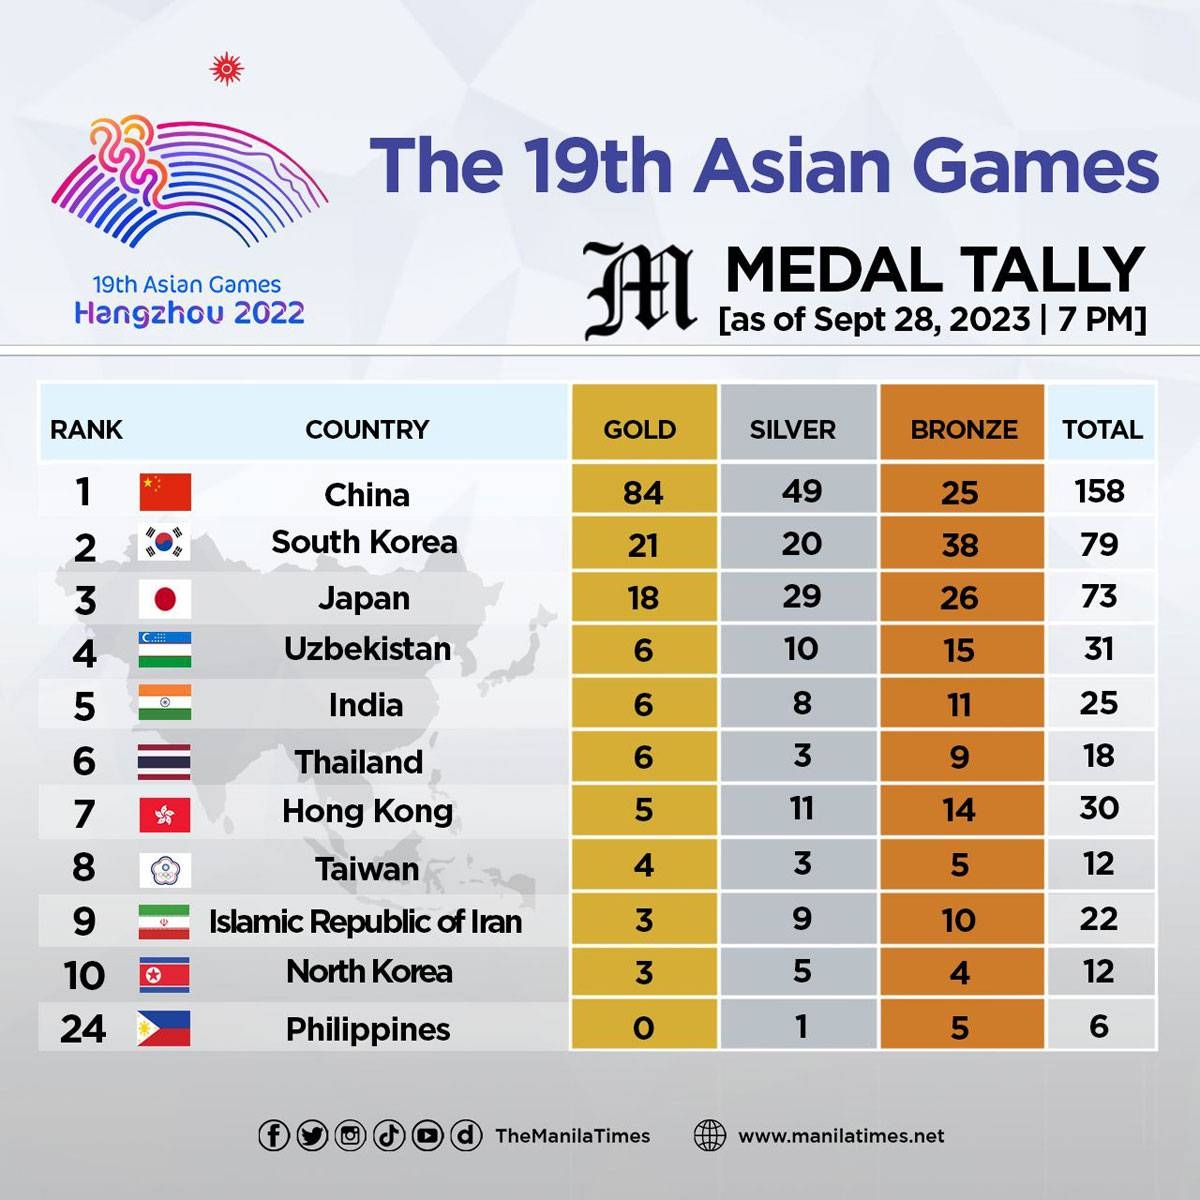 The 19th Asian Games medal tally as of Sept. 28, 2023 0700 PM The Manila Times